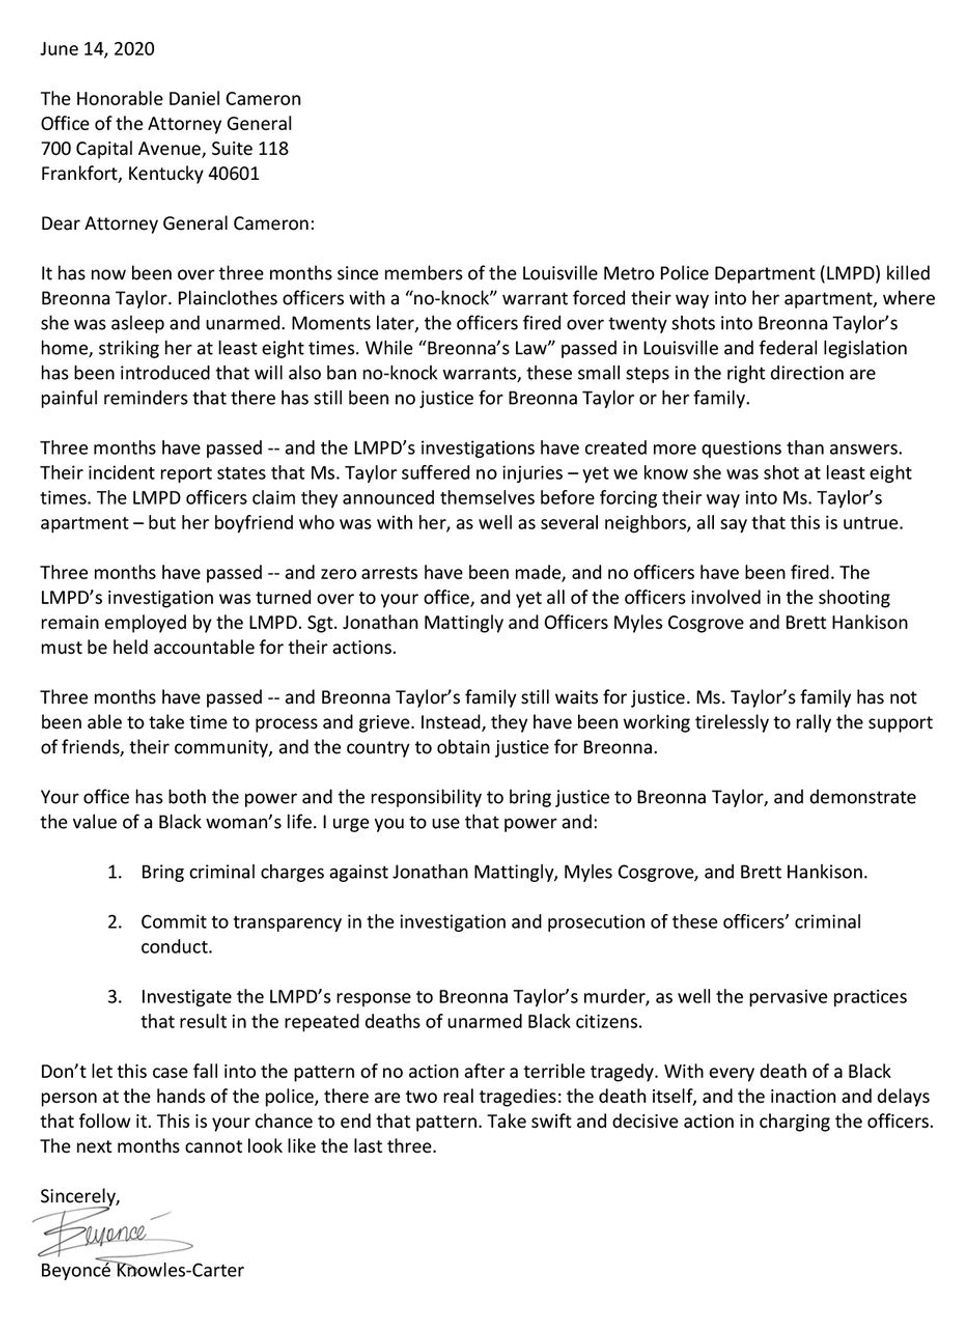 Letter to Attorney General